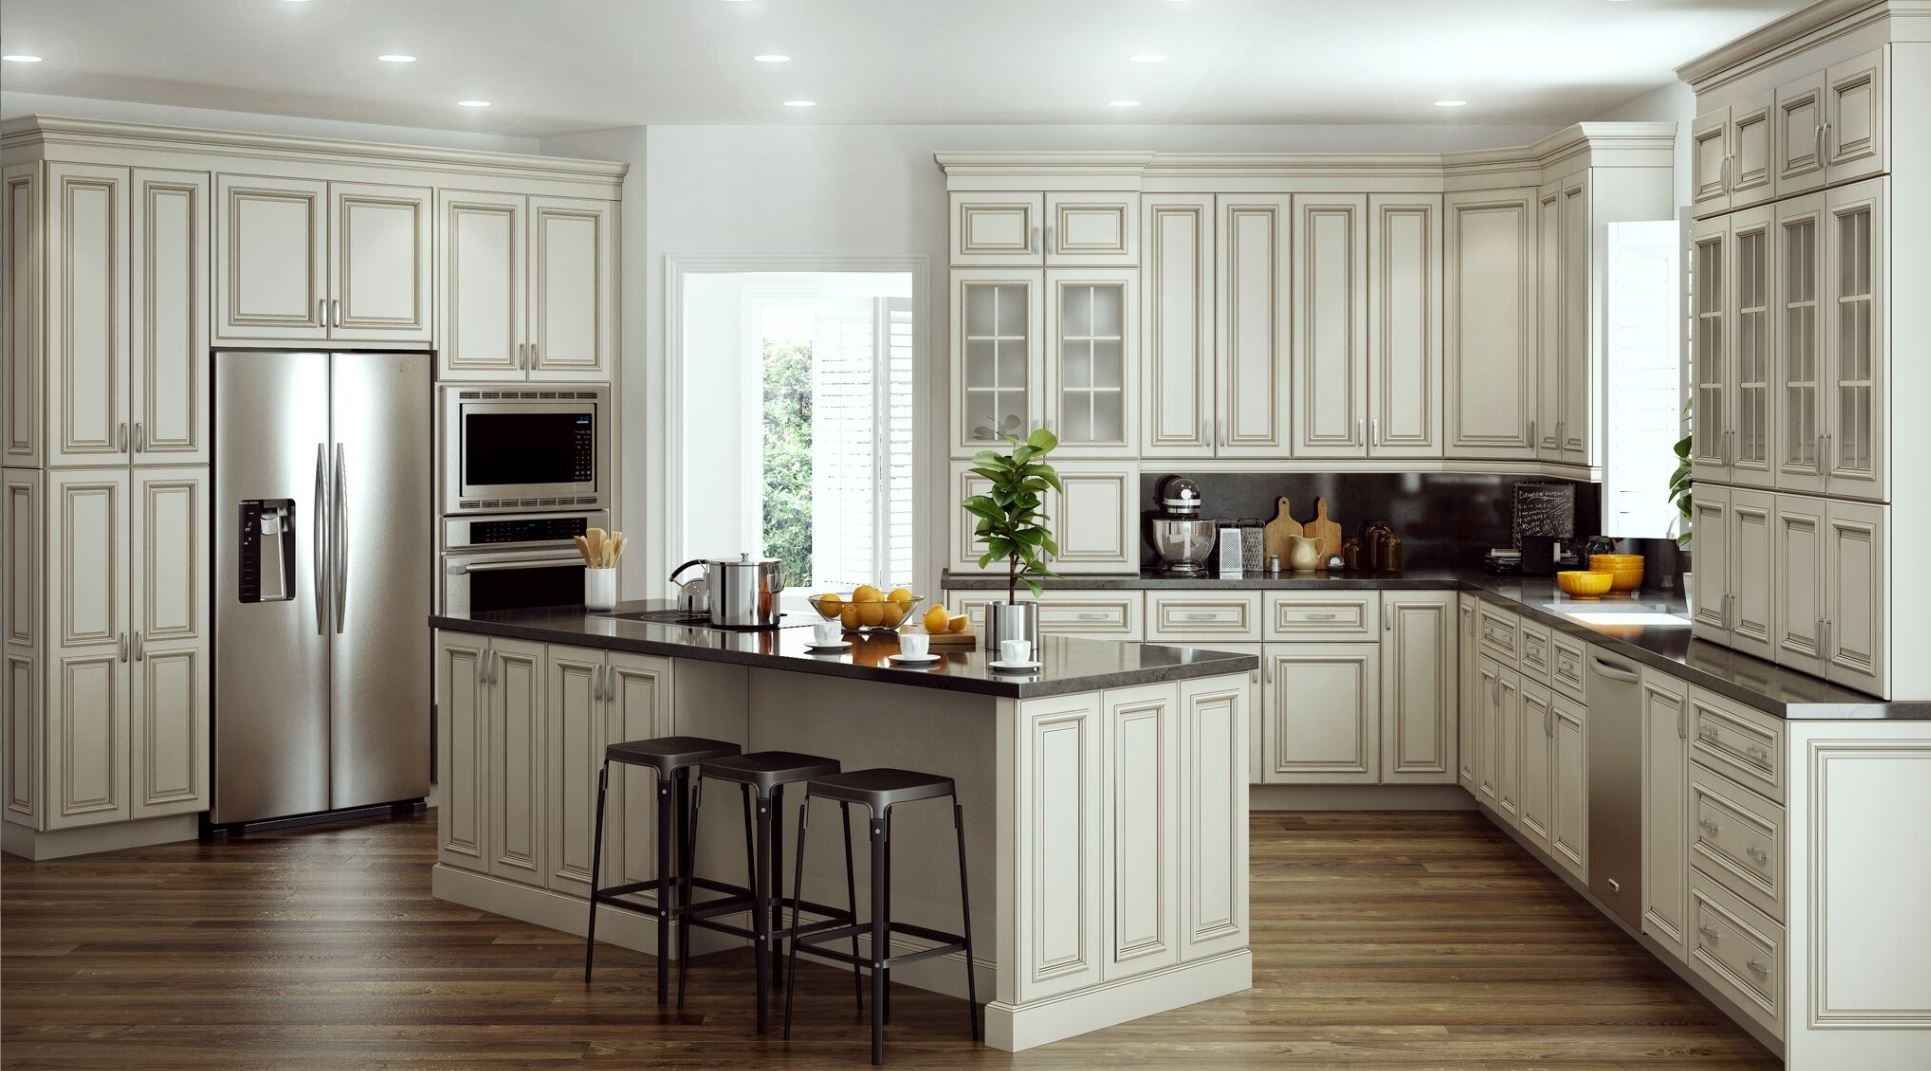 Create customize your kitchen cabinets holden wall